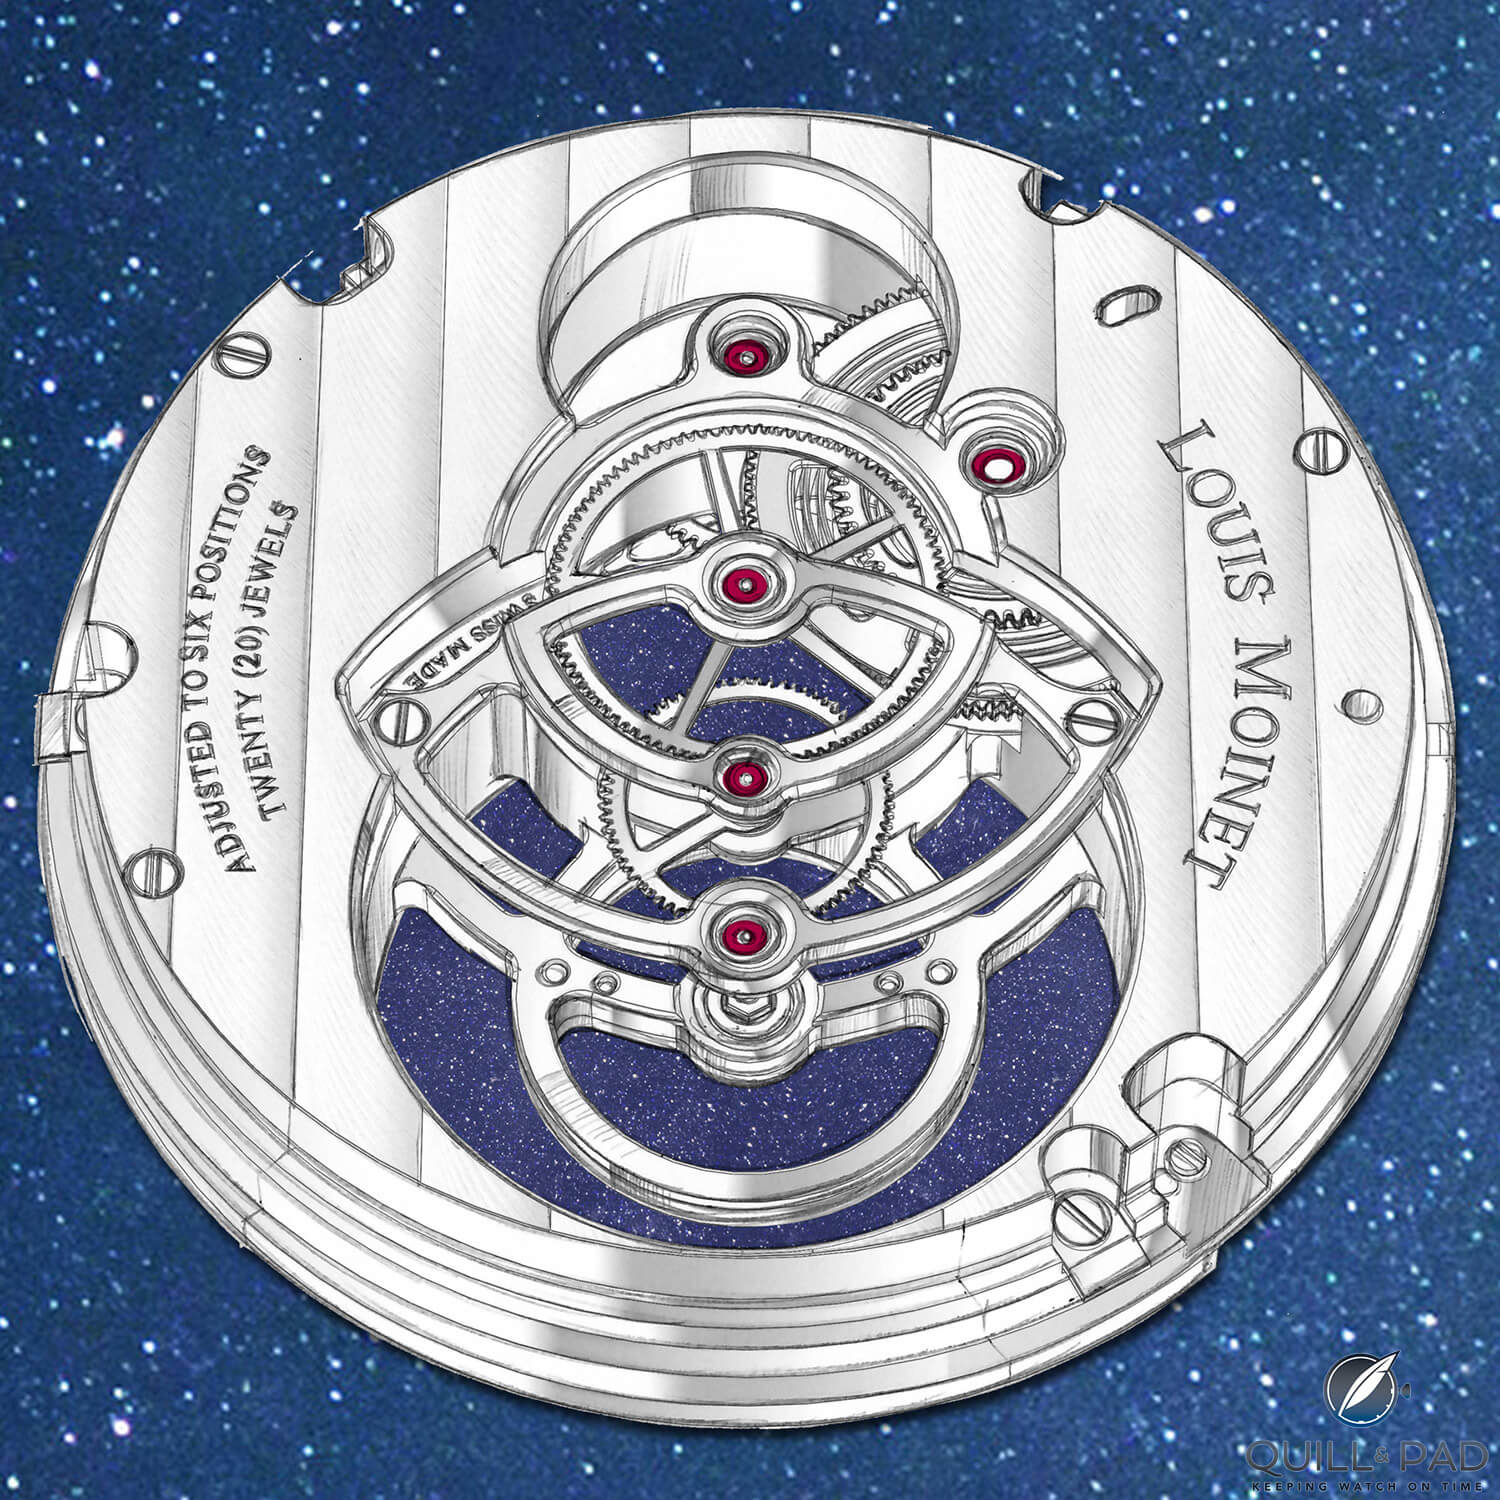 See-though movement of the Louis Moinet Spacewalker